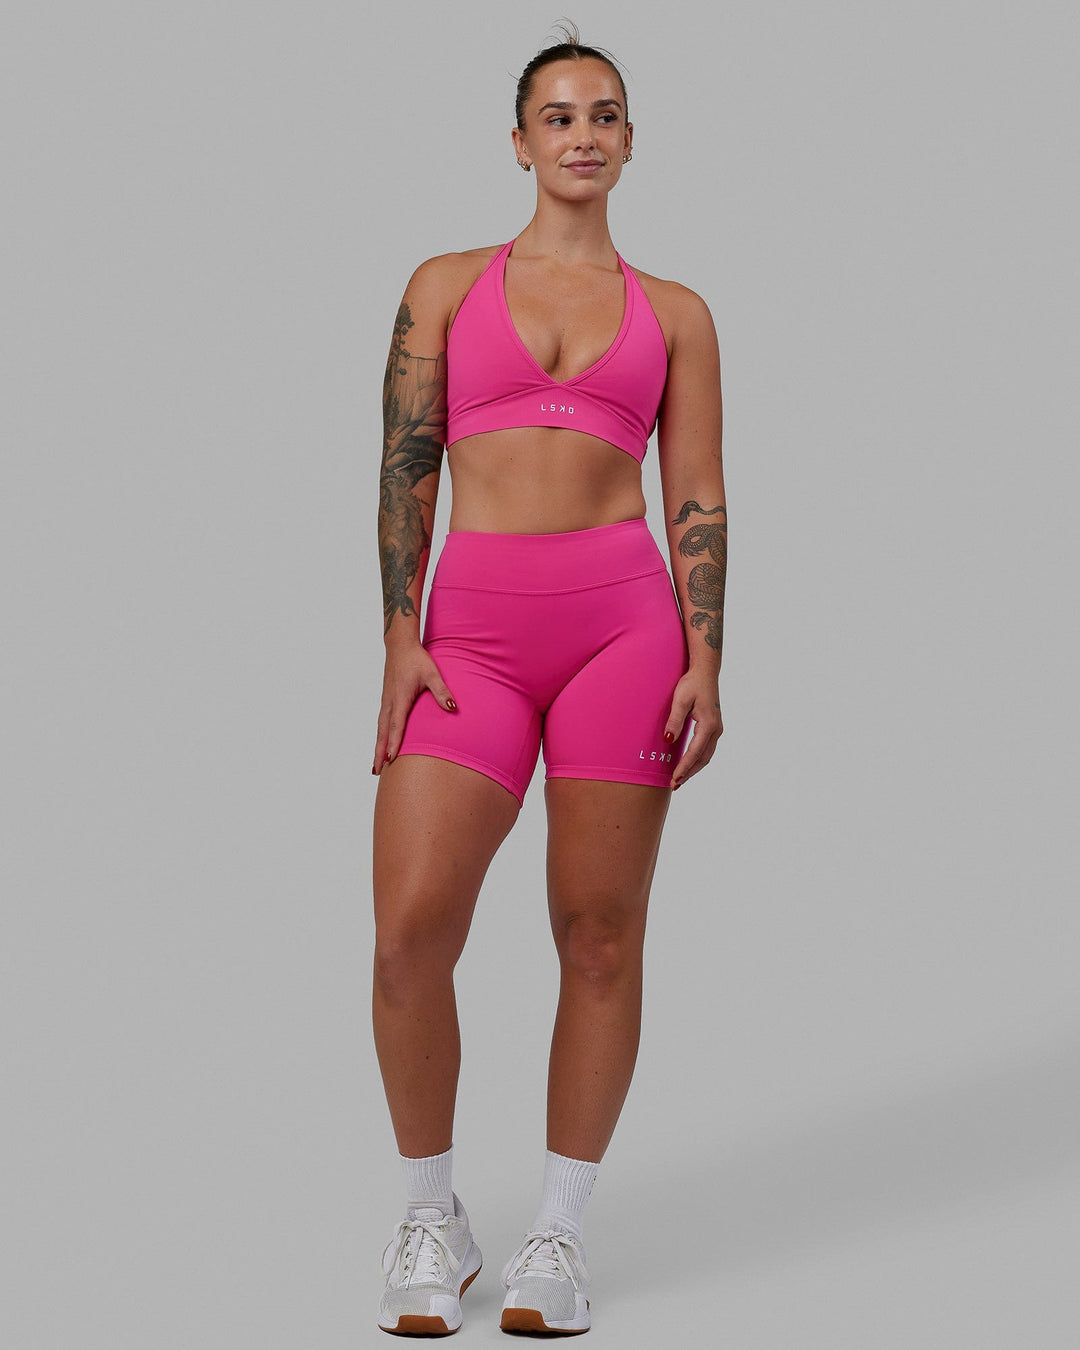 Woman wearing RXD Mid Short Tights - Ultra Pink